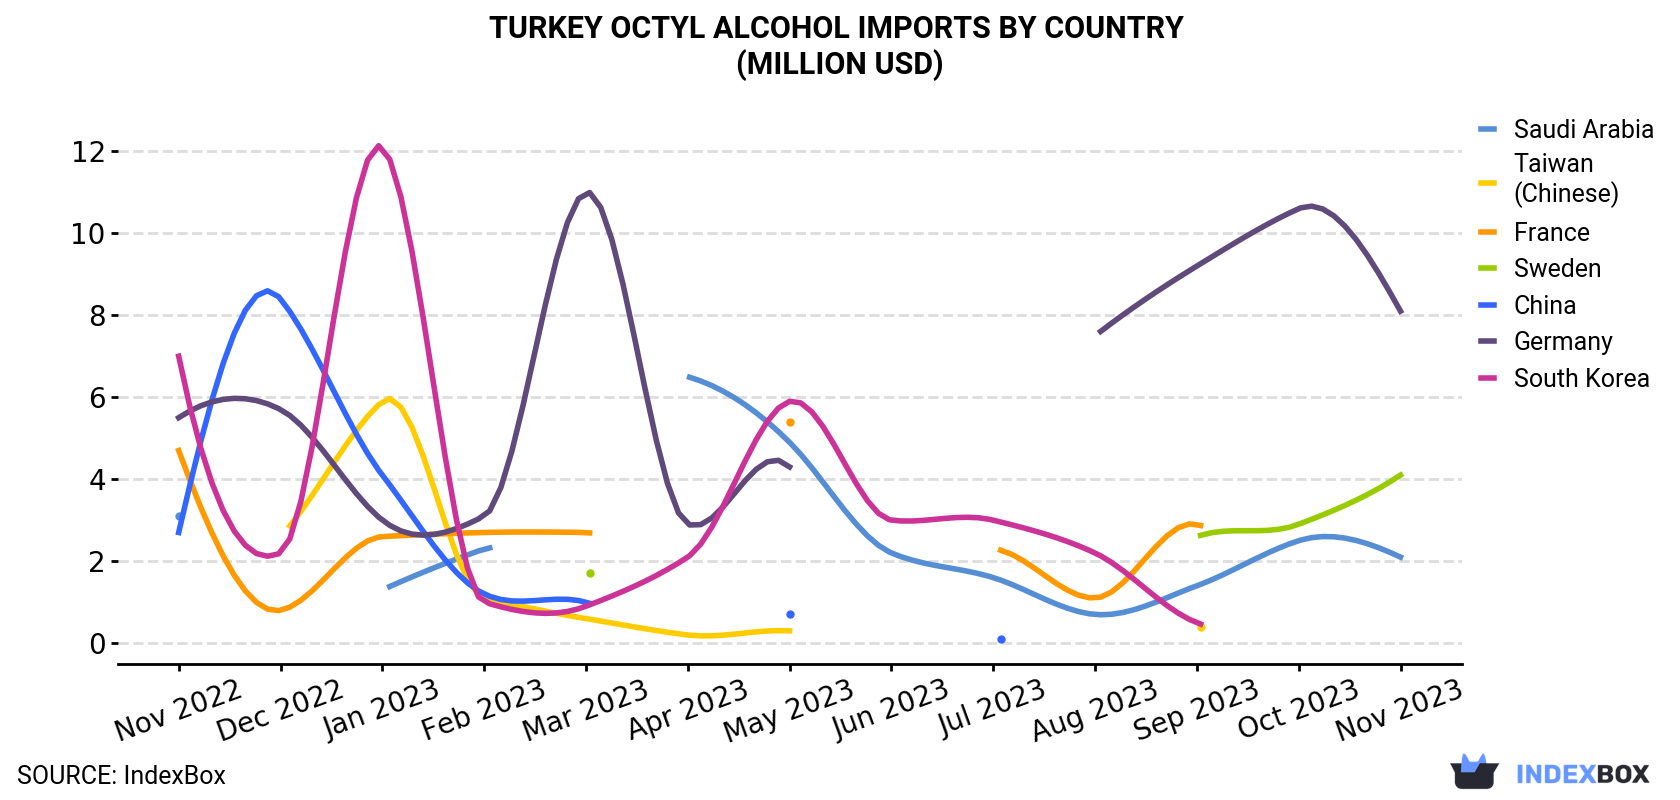 Turkey Octyl Alcohol Imports By Country (Million USD)